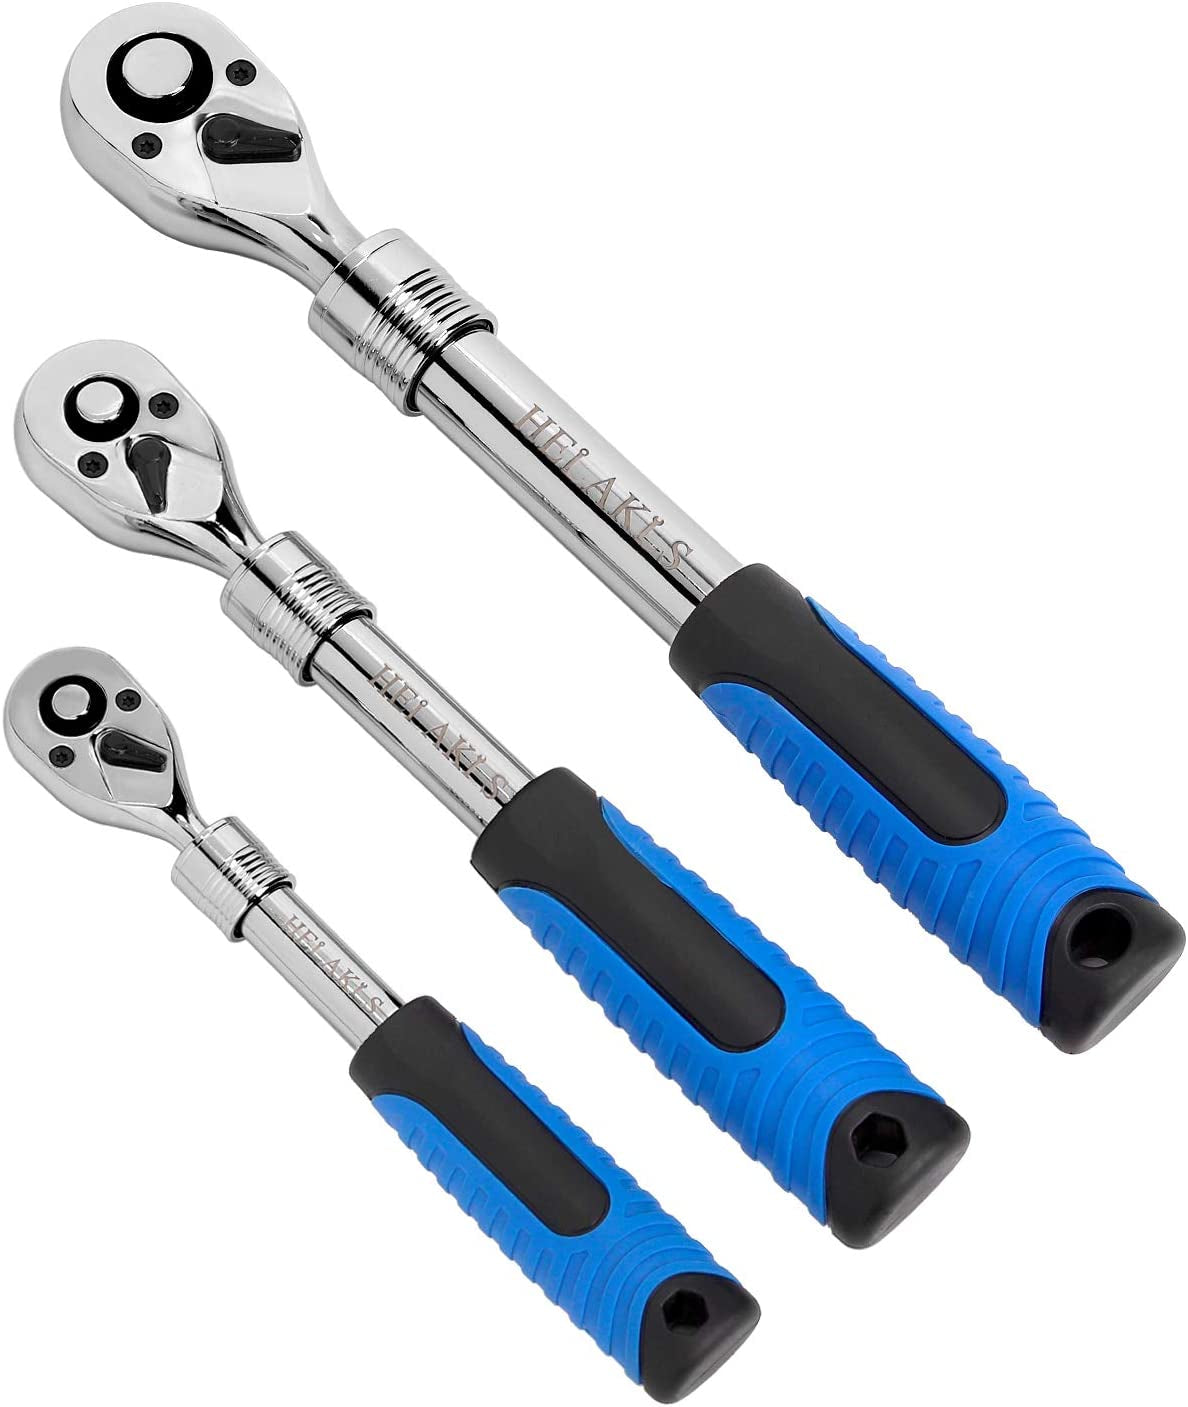 3-Piece Extendable Ratchet Set 1/4" 3/8" 1/2-Inch Drive Socket Wrench 72-Tooth Quick-Release Reversible CR-V Gear Torque Spanner with Soft Grip Handle Hand Tools